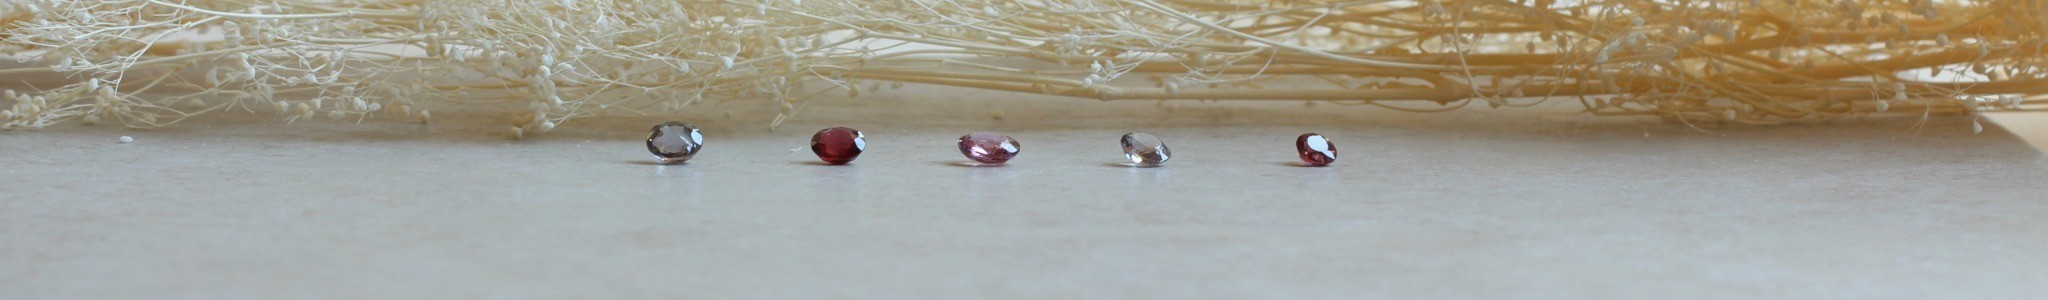 Spinel Product Line Image